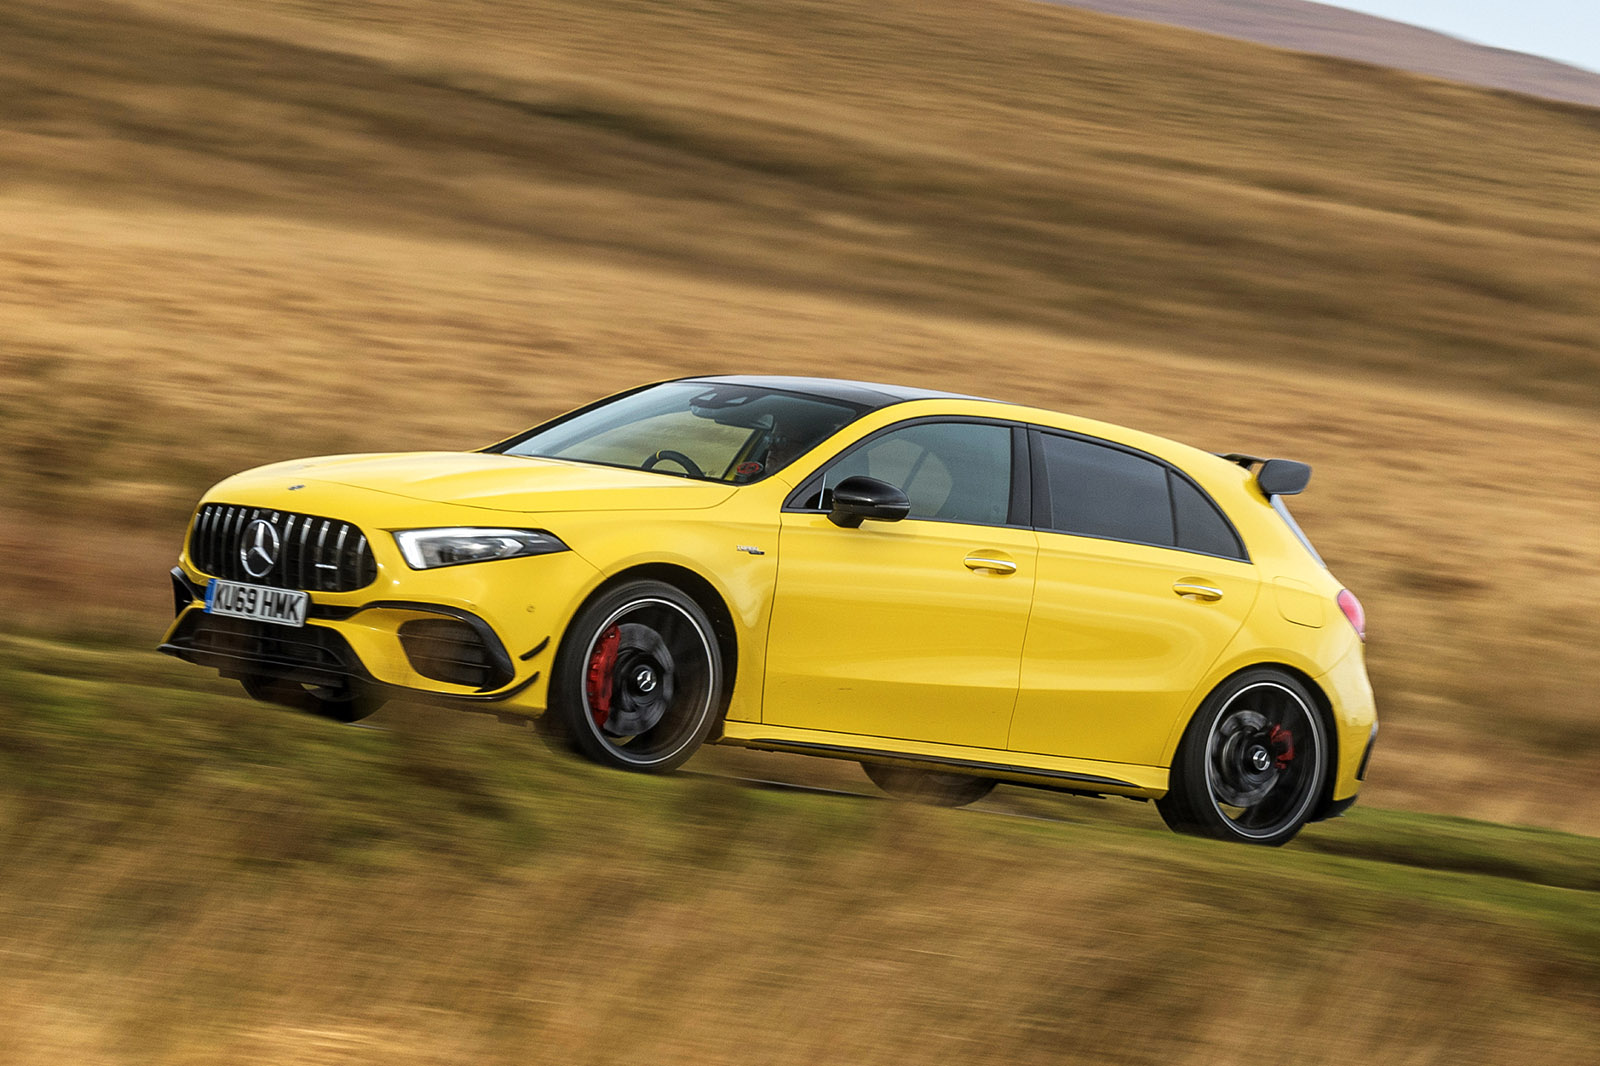 Mercedes-AMG A45 S 4Matic+ 2020 road test review - hero side